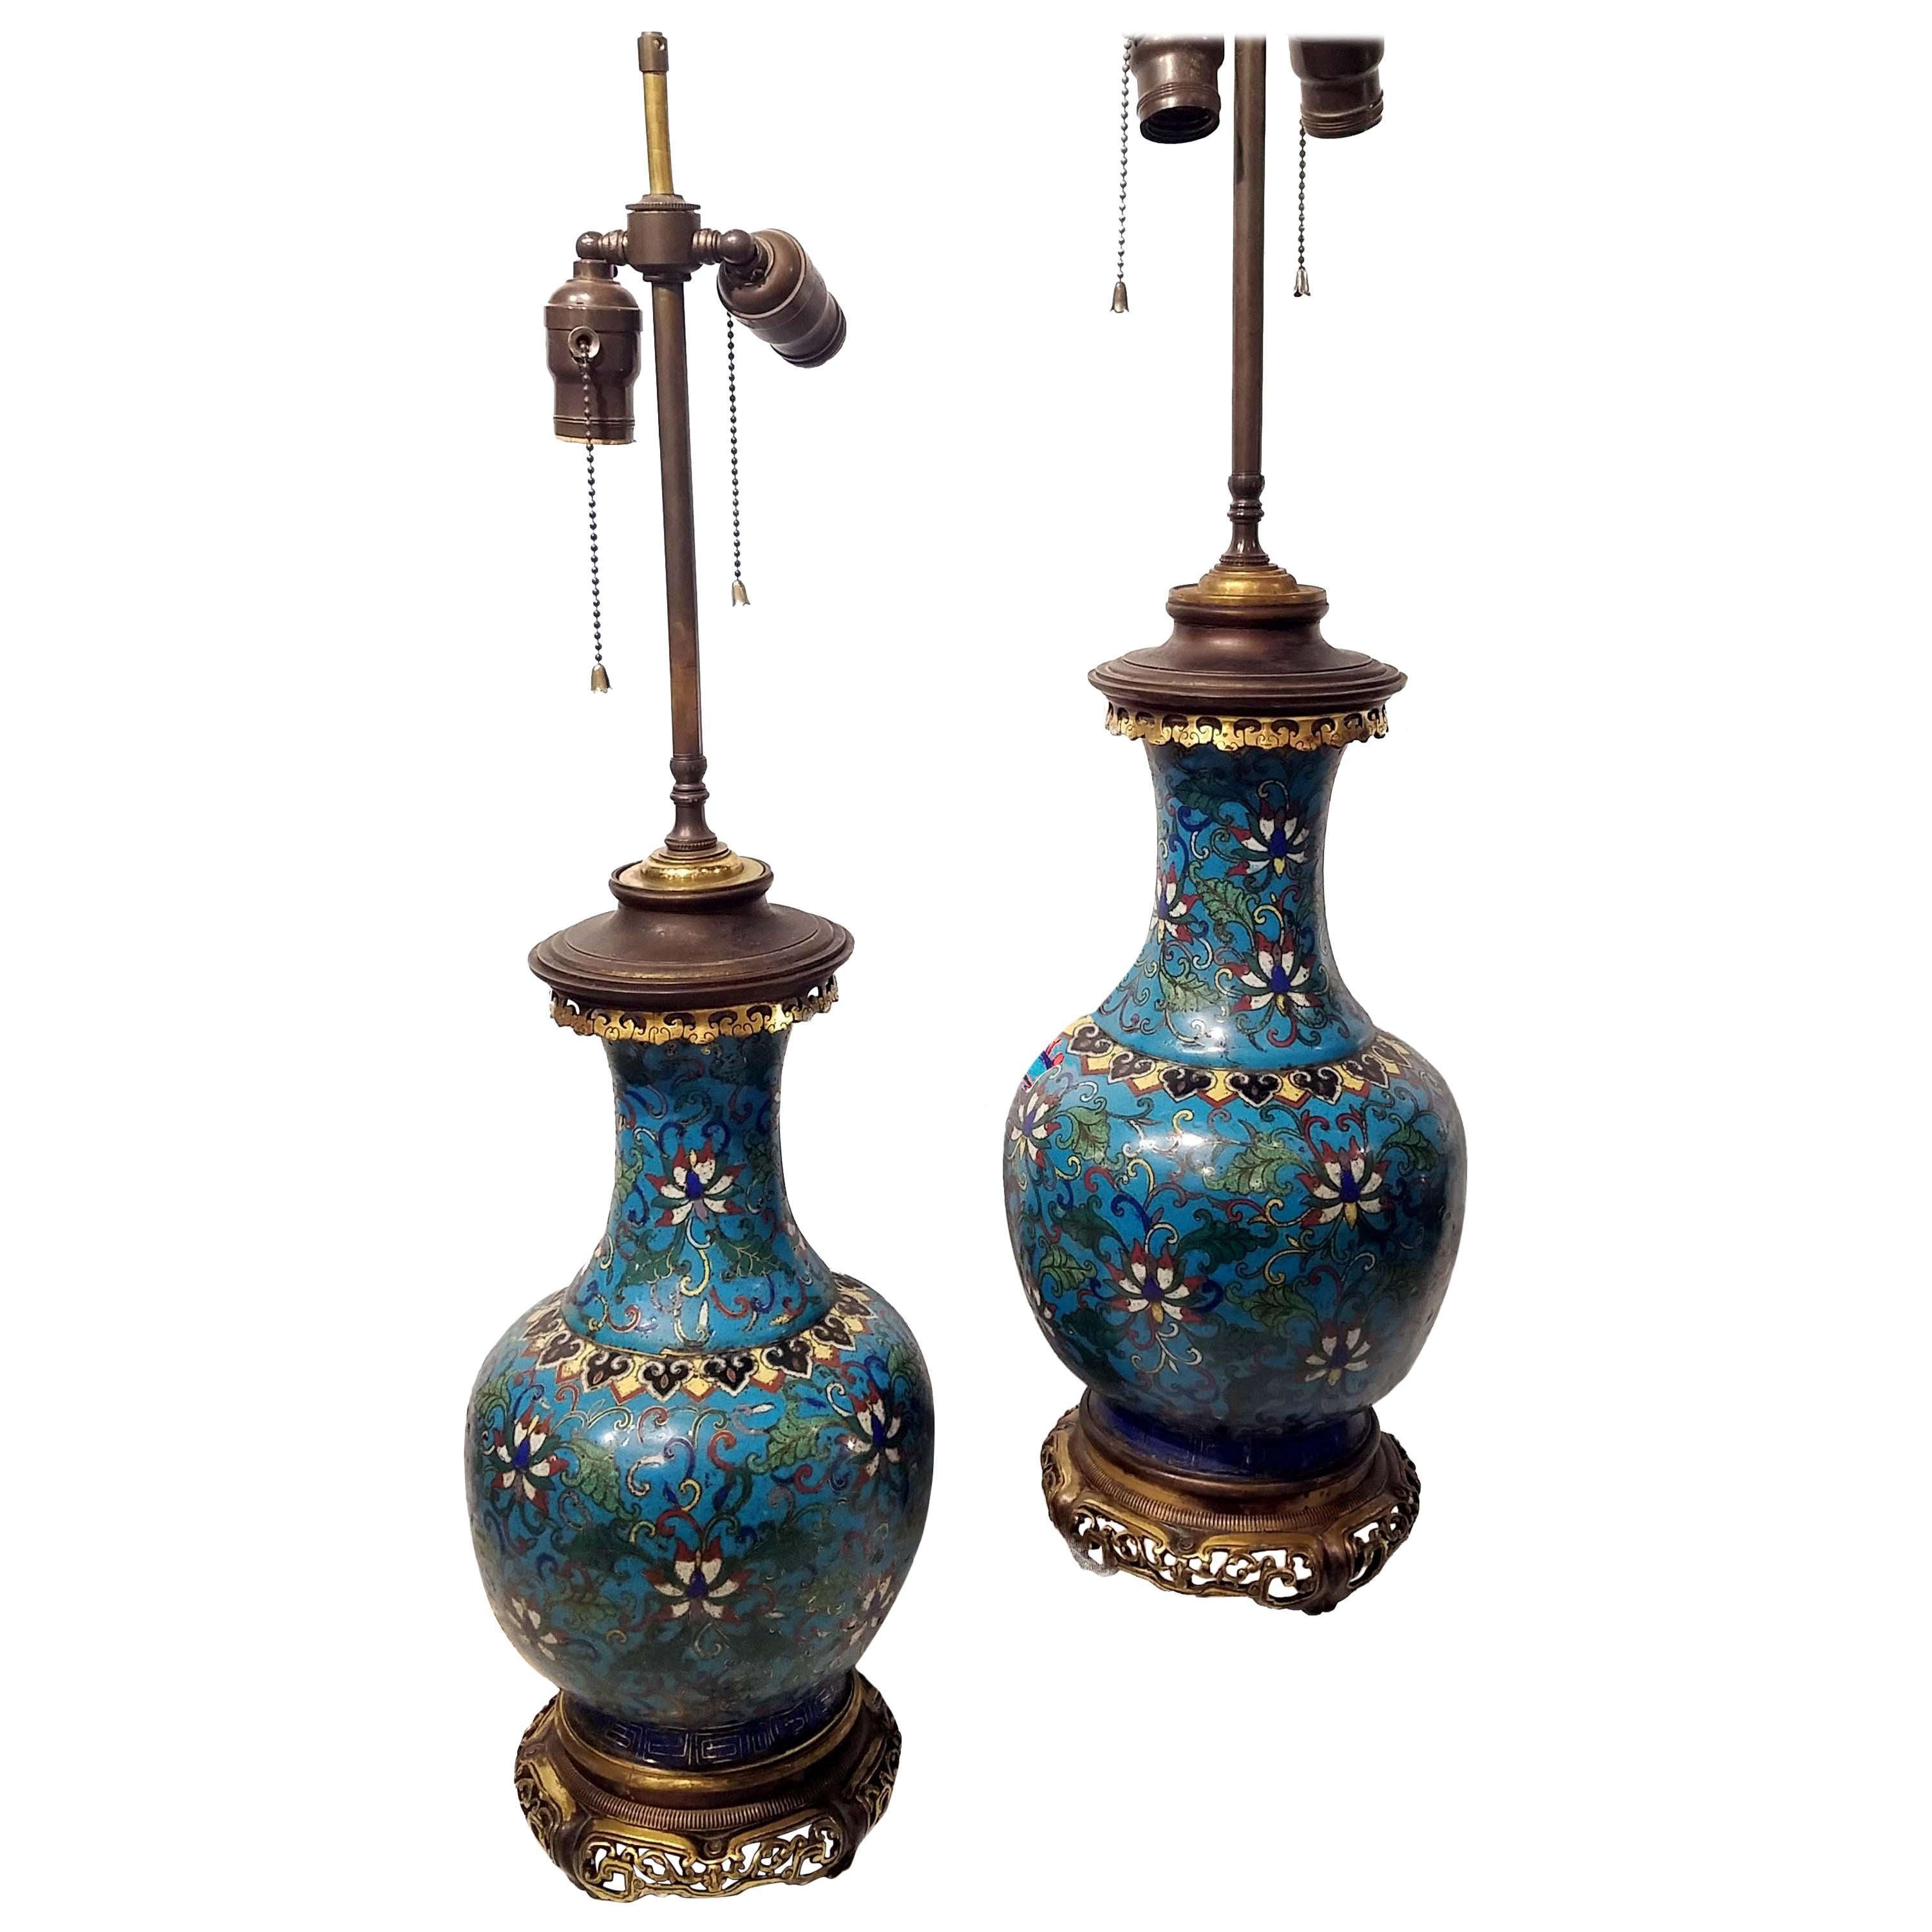 Pair of Chinese Cloisonné Vases Made into Lamps, 18th Century